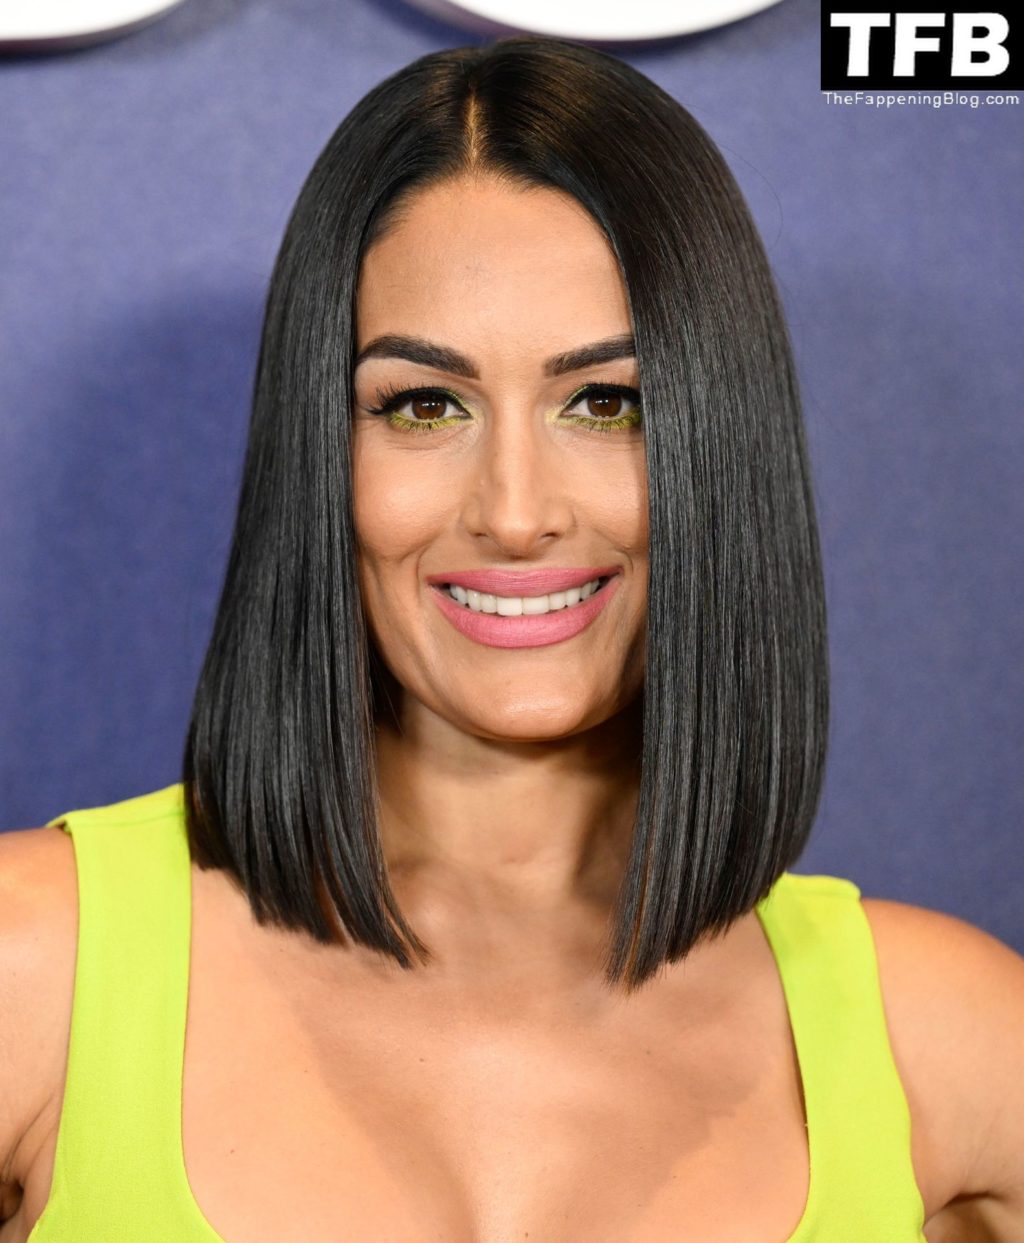 Nikki Bella Sexy The Fappening Blog 3 1024x1243 - Nikki Bella Flaunts Her Cleavage at NBCUniversal’s 2022 Upfront Press Junket (21 Photos)